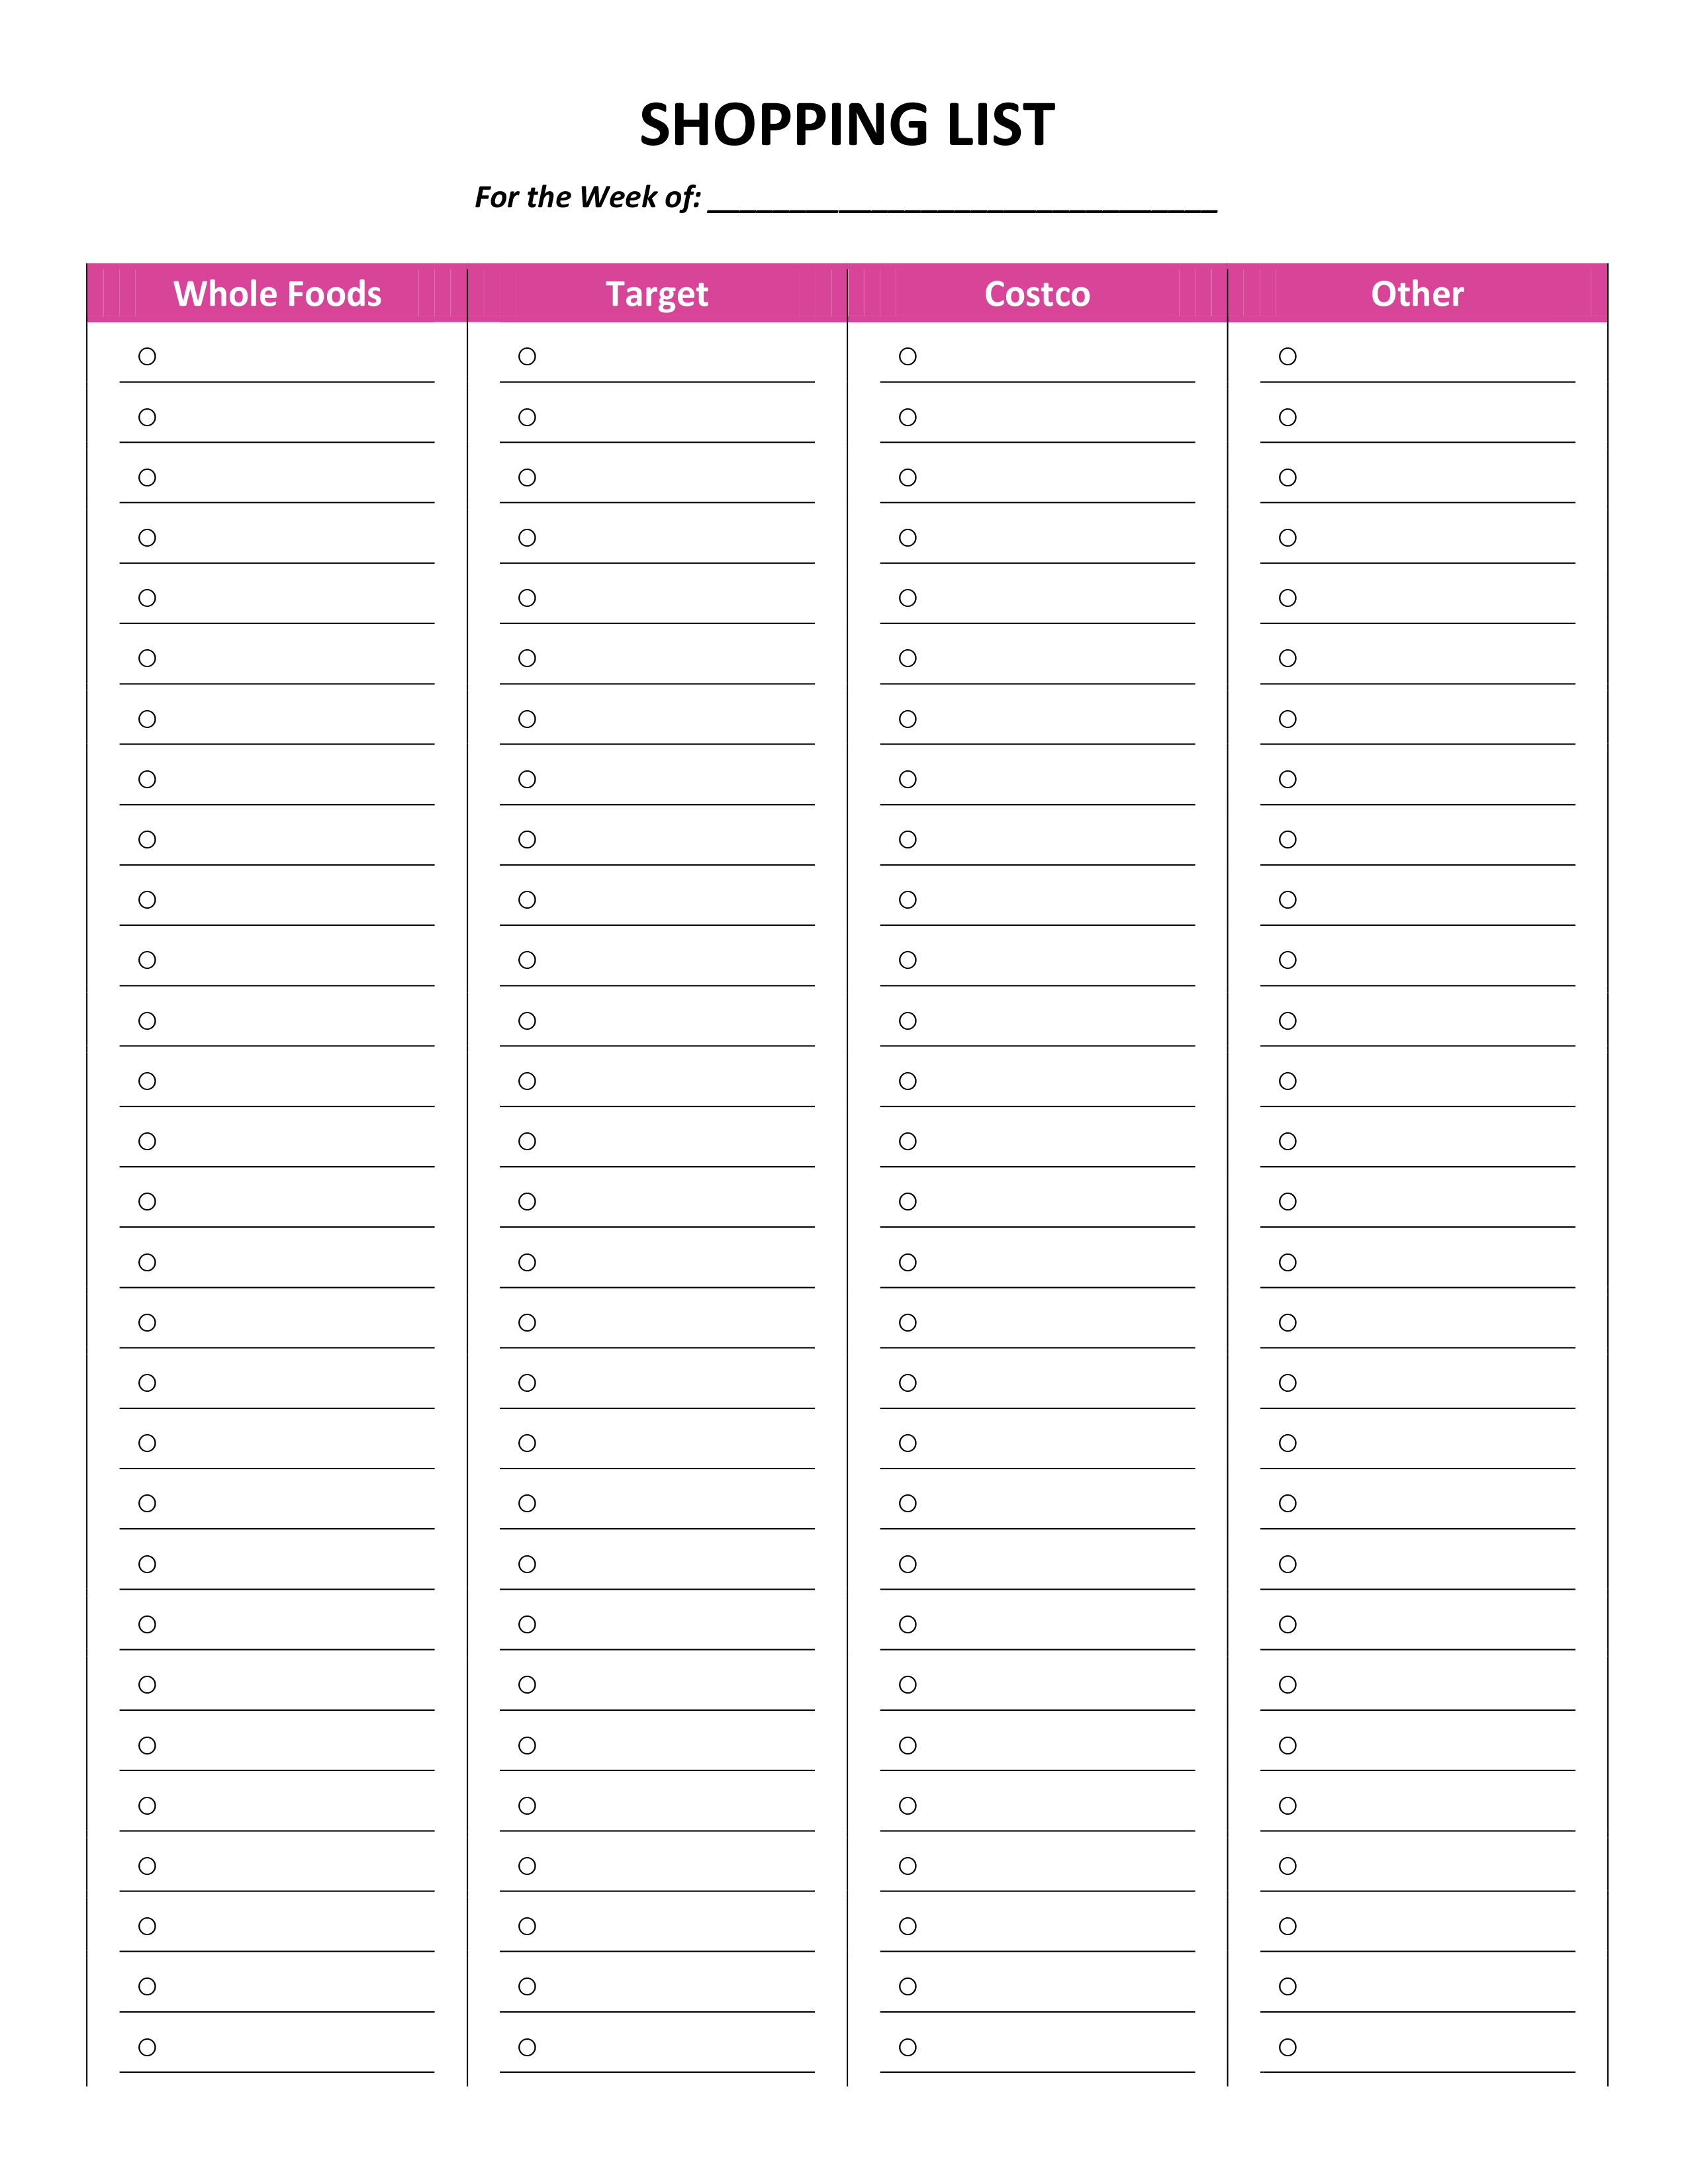 List Printable Images Gallery Category Page 14 - printablee.com